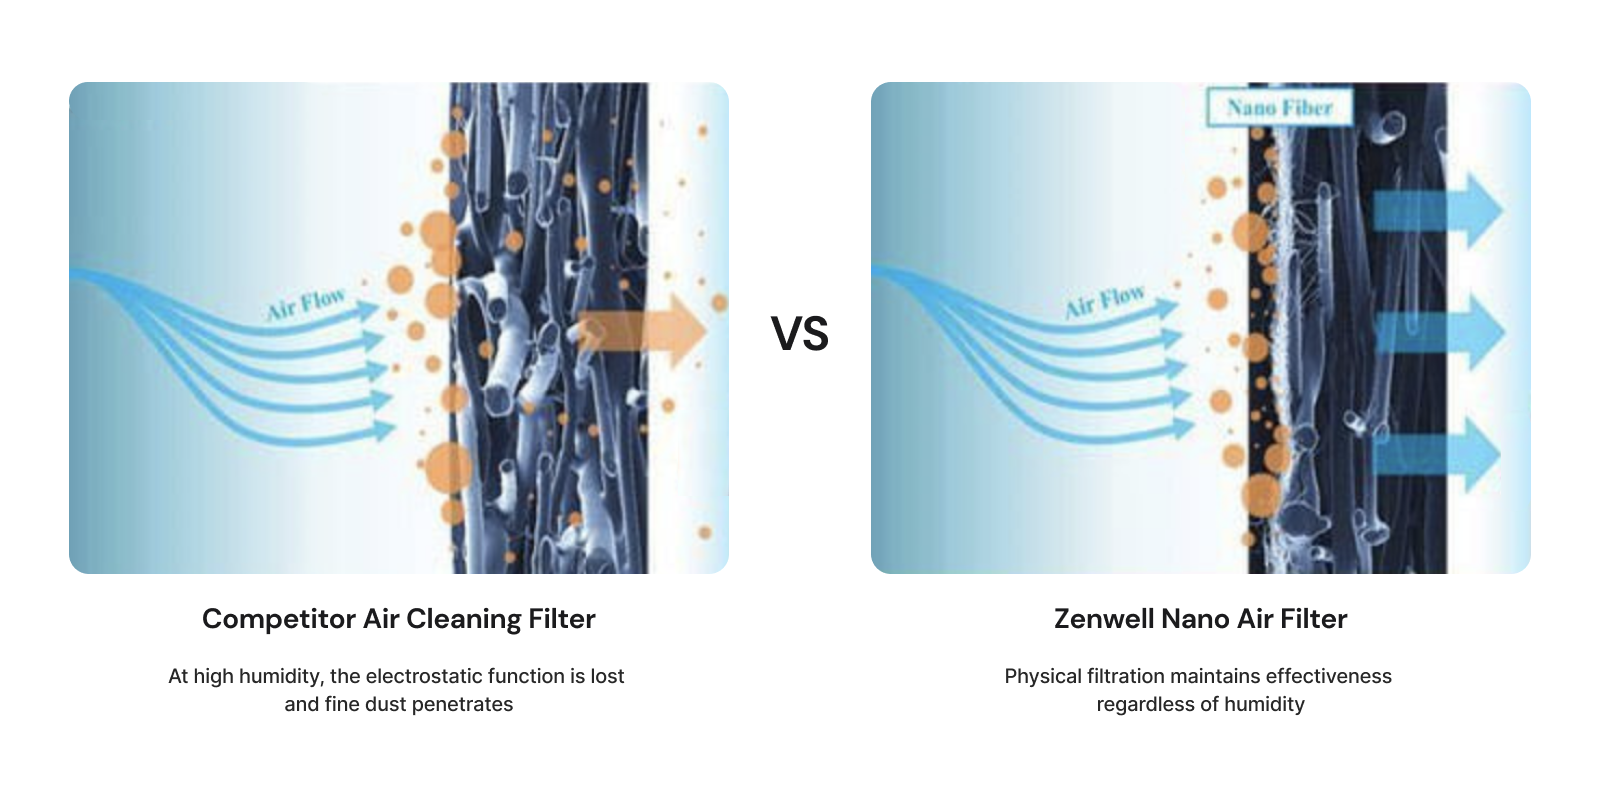 Pictures of competitor electrostatic air filter and Zenwell Nano Air Filter with air flow and dust graphics visualizing how Zenwell's nano air filter maintains effectiveness regardless of humidity